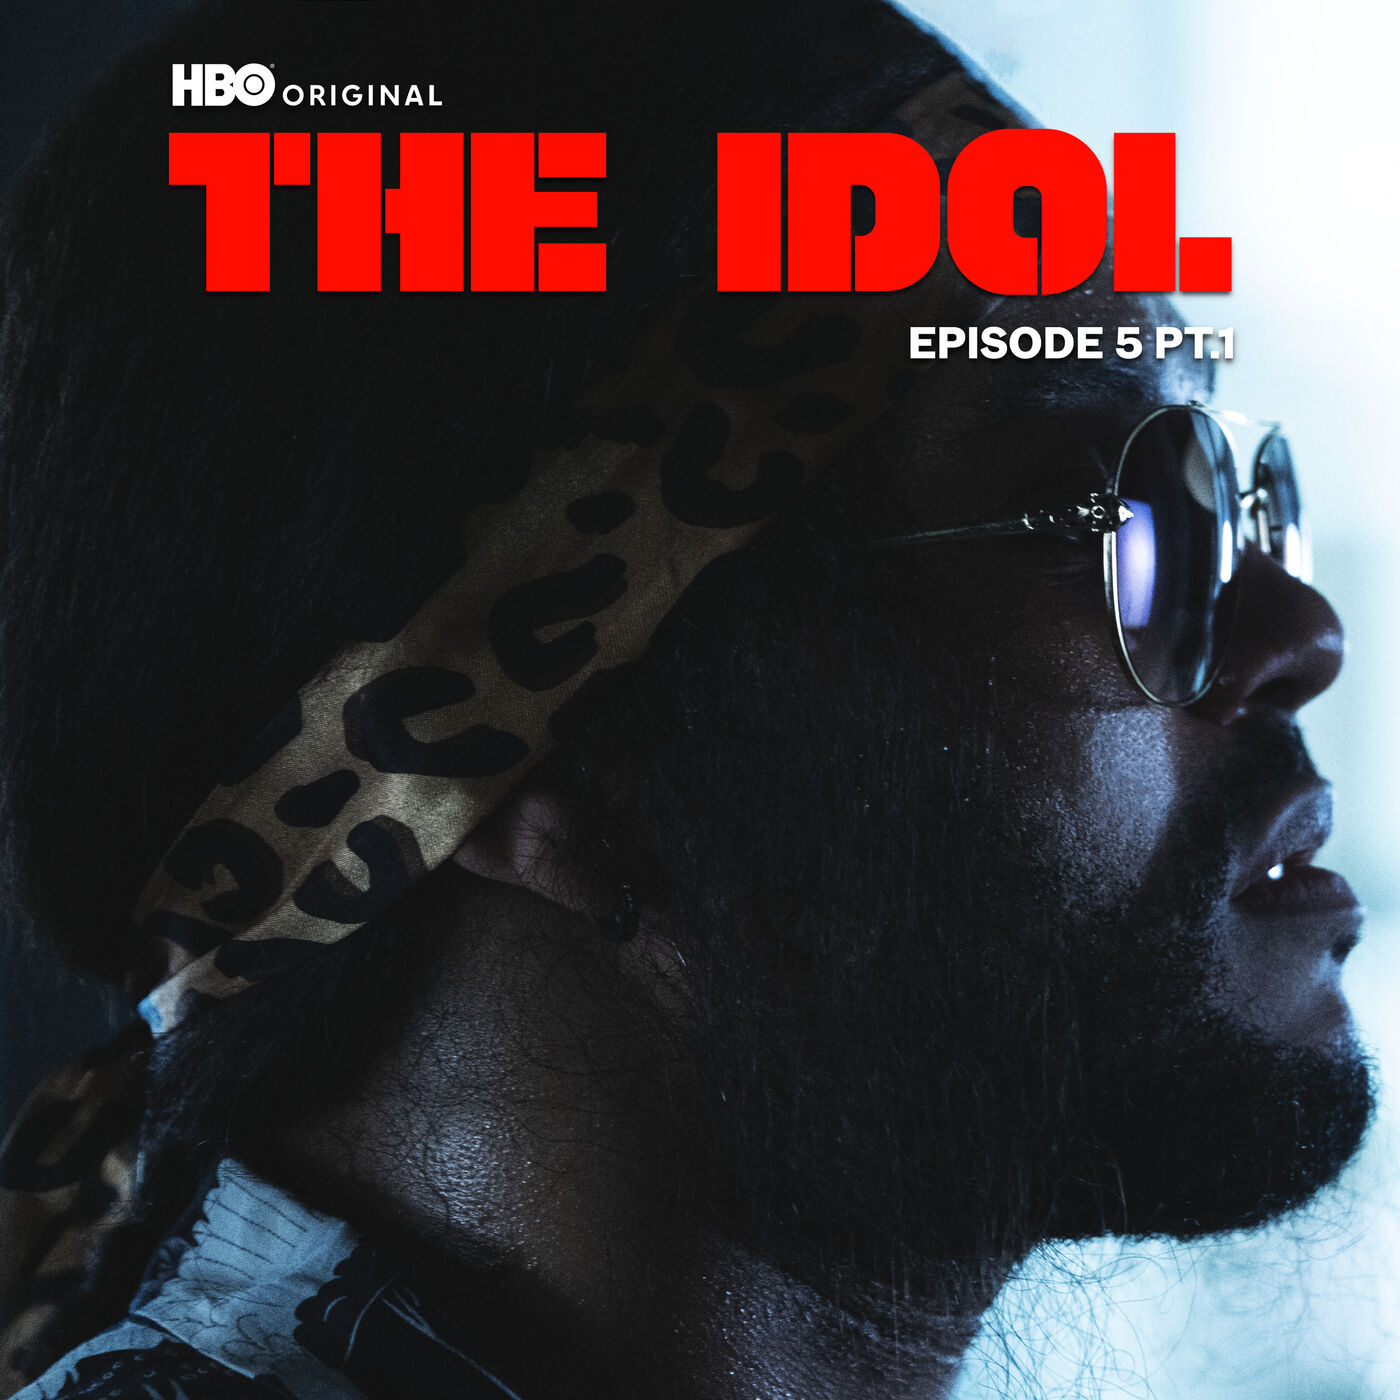 The Weeknd – The Idol Episode 5 Part 1 (Music from the HBO Original Series)【88.2kHz／24bit】美国区-OppsUpro音乐帝国